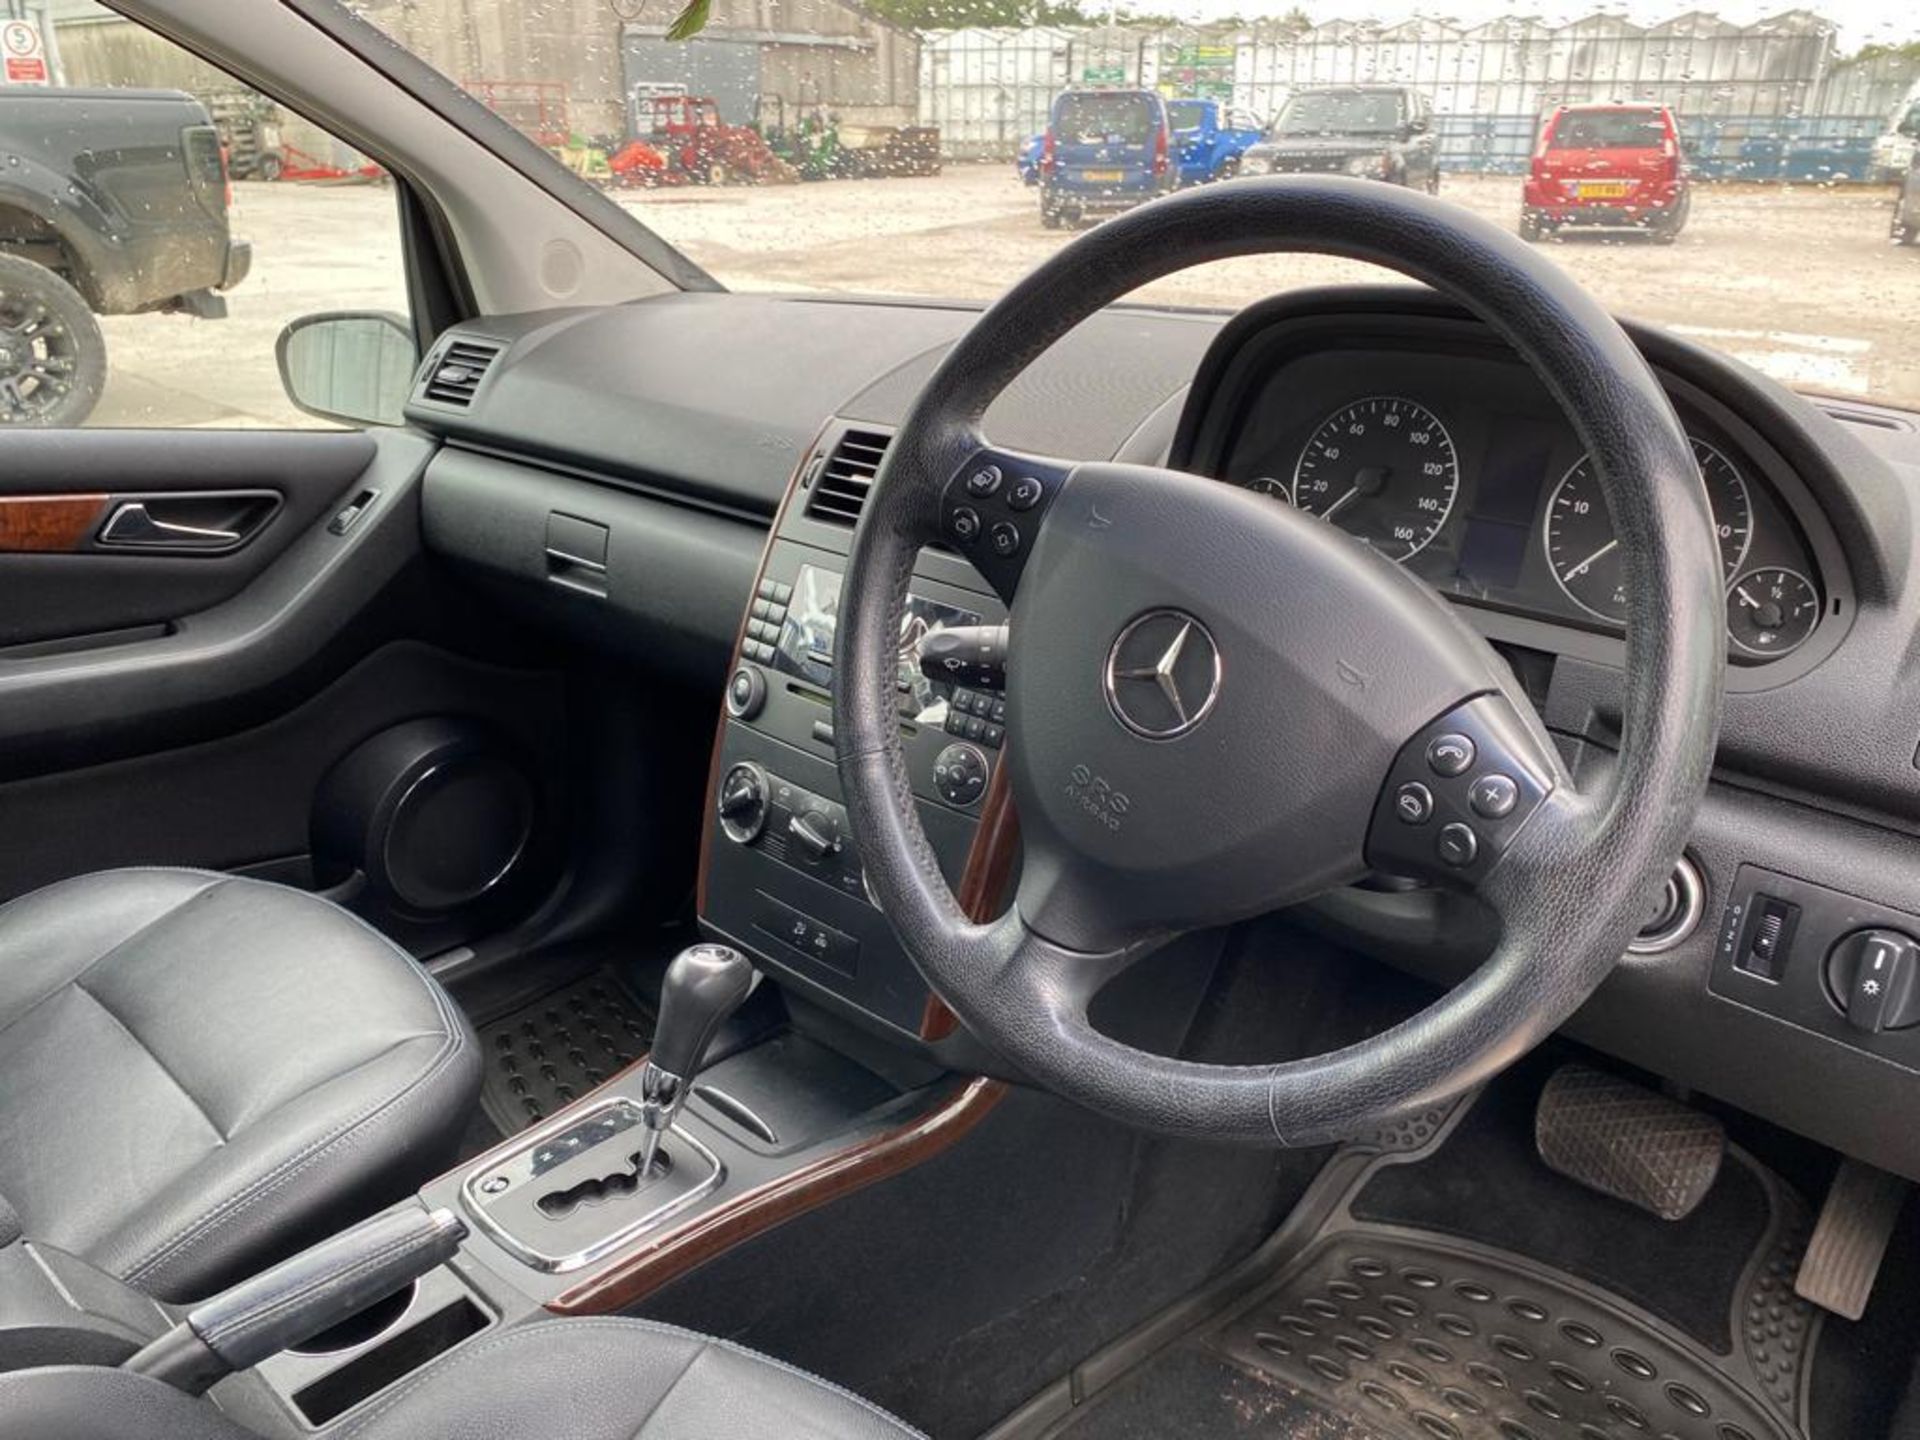 MERCEDES AUTOMATIC 2005 A160 CDI ELEGANCE SE AUTO, 5 DOORS, SILVER, LEATHER UPHOLSTERY WITH - Image 6 of 6